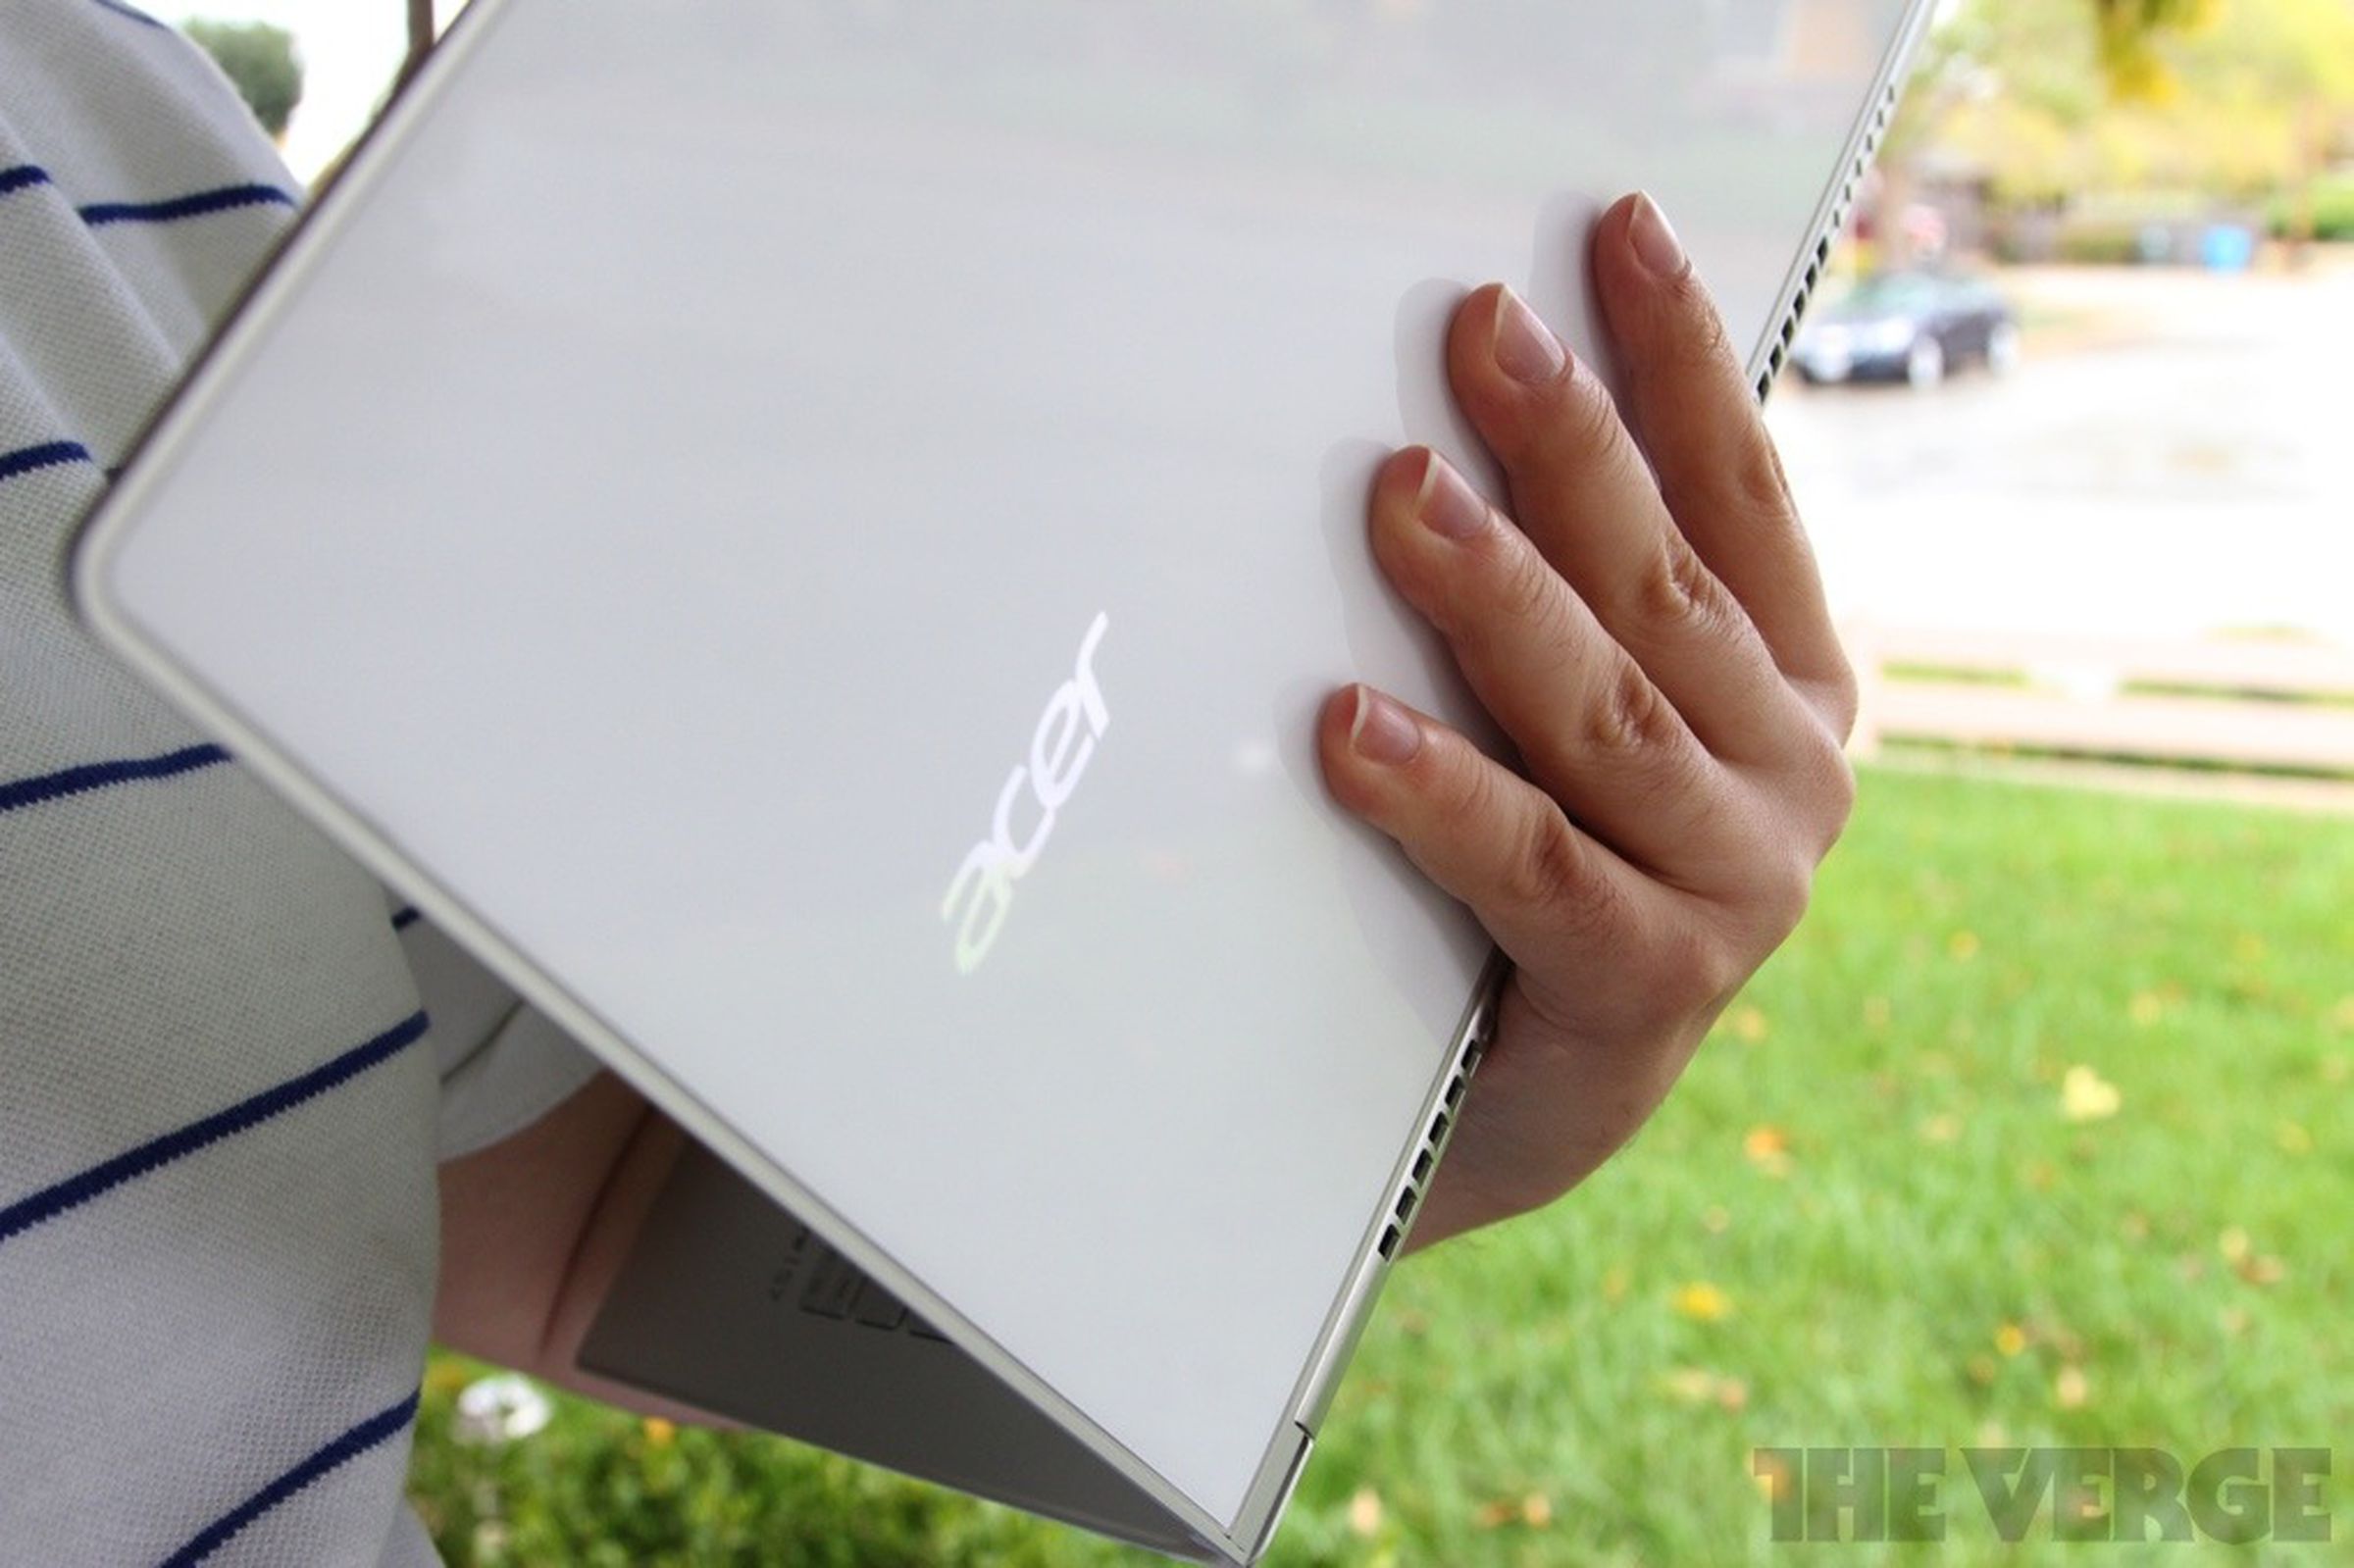 Acer Aspire S7 pictures